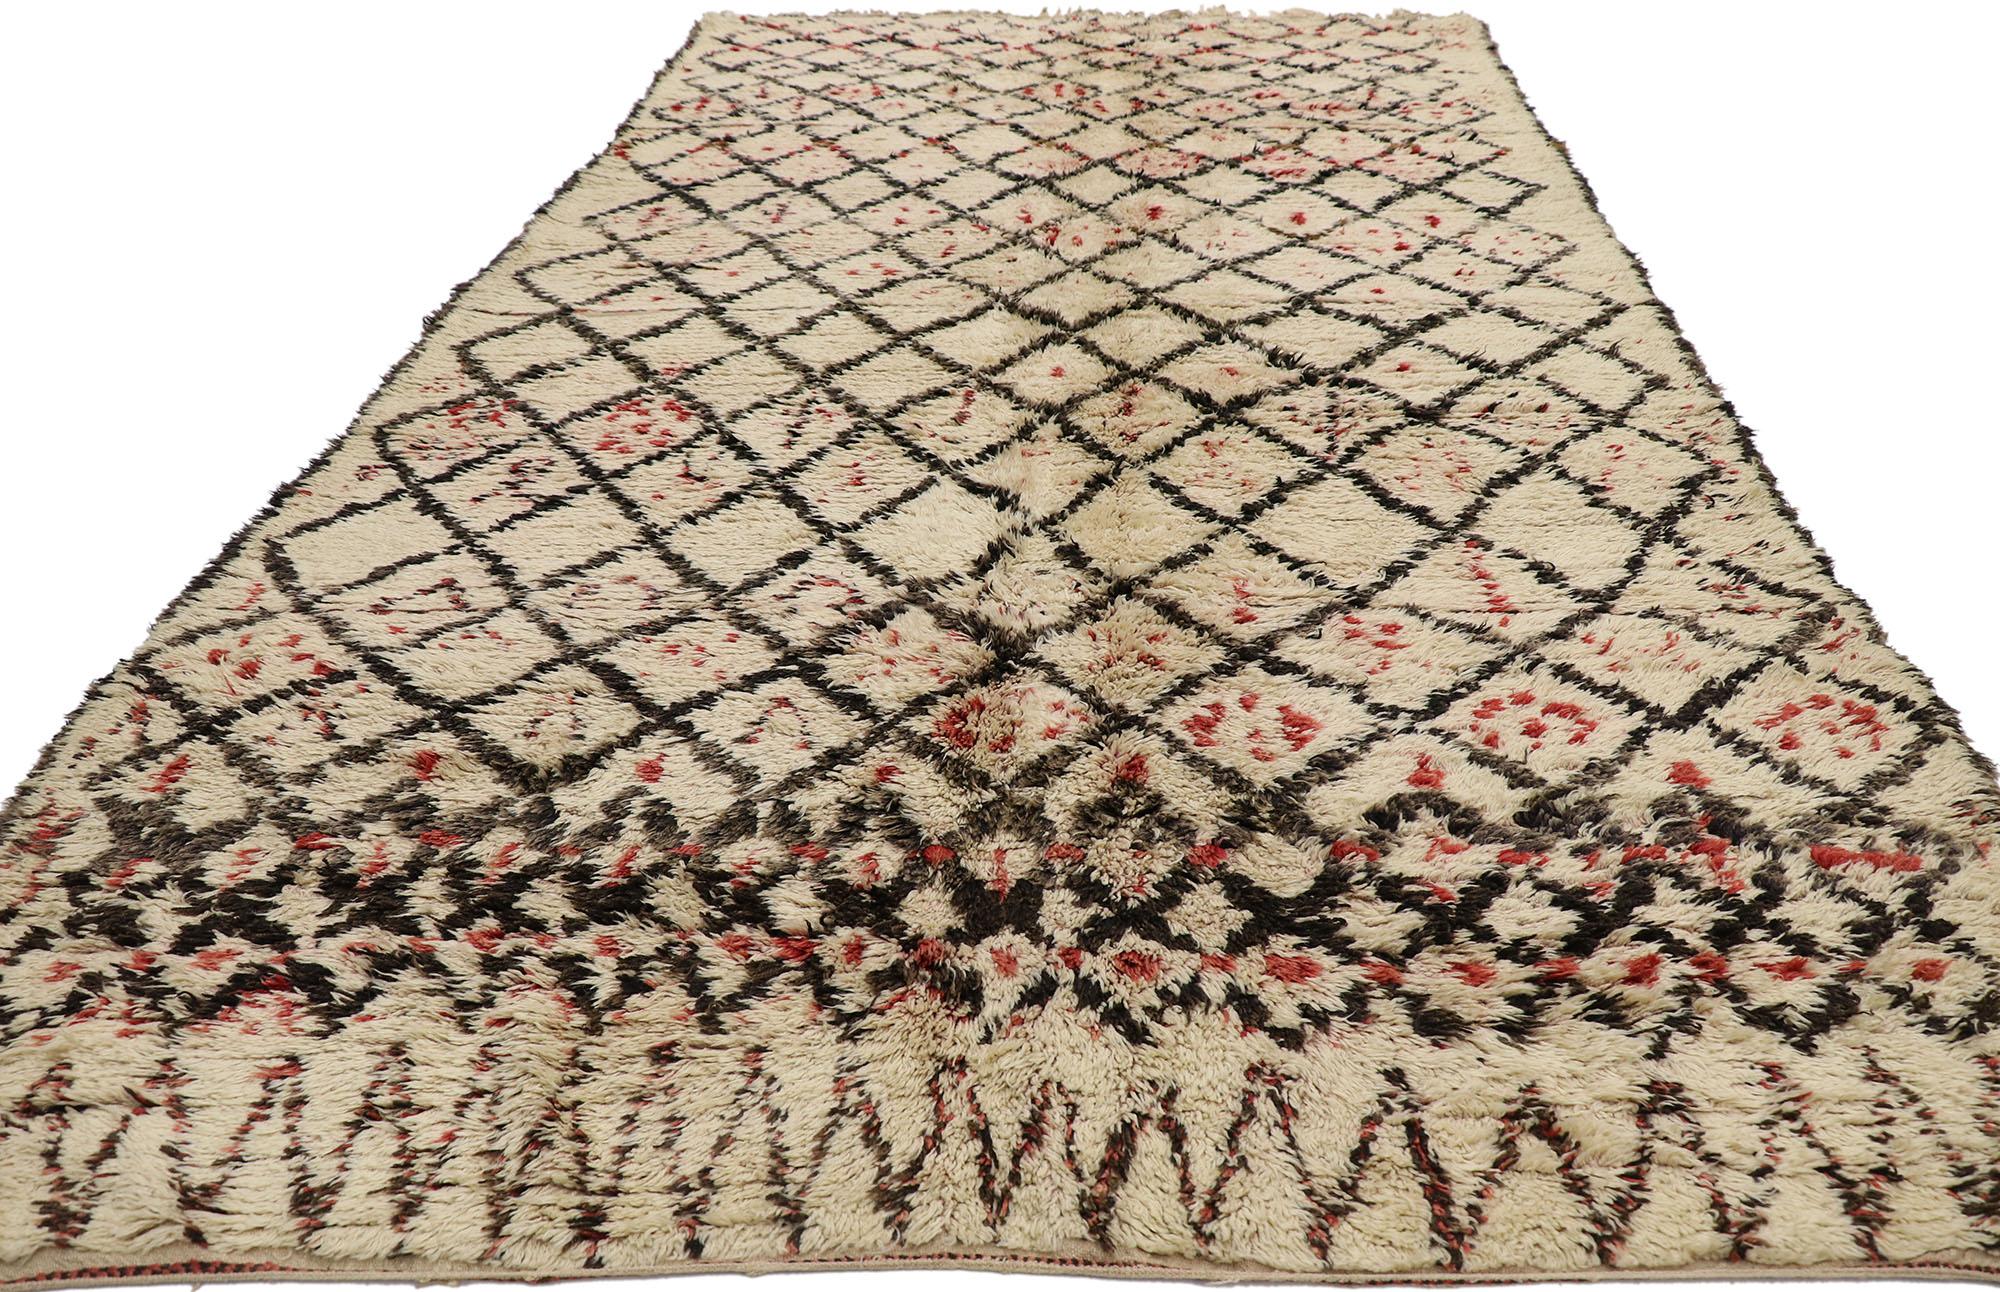 Tribal Vintage Moroccan Beni Ourain Rug, Berber Tribes of Morocco For Sale